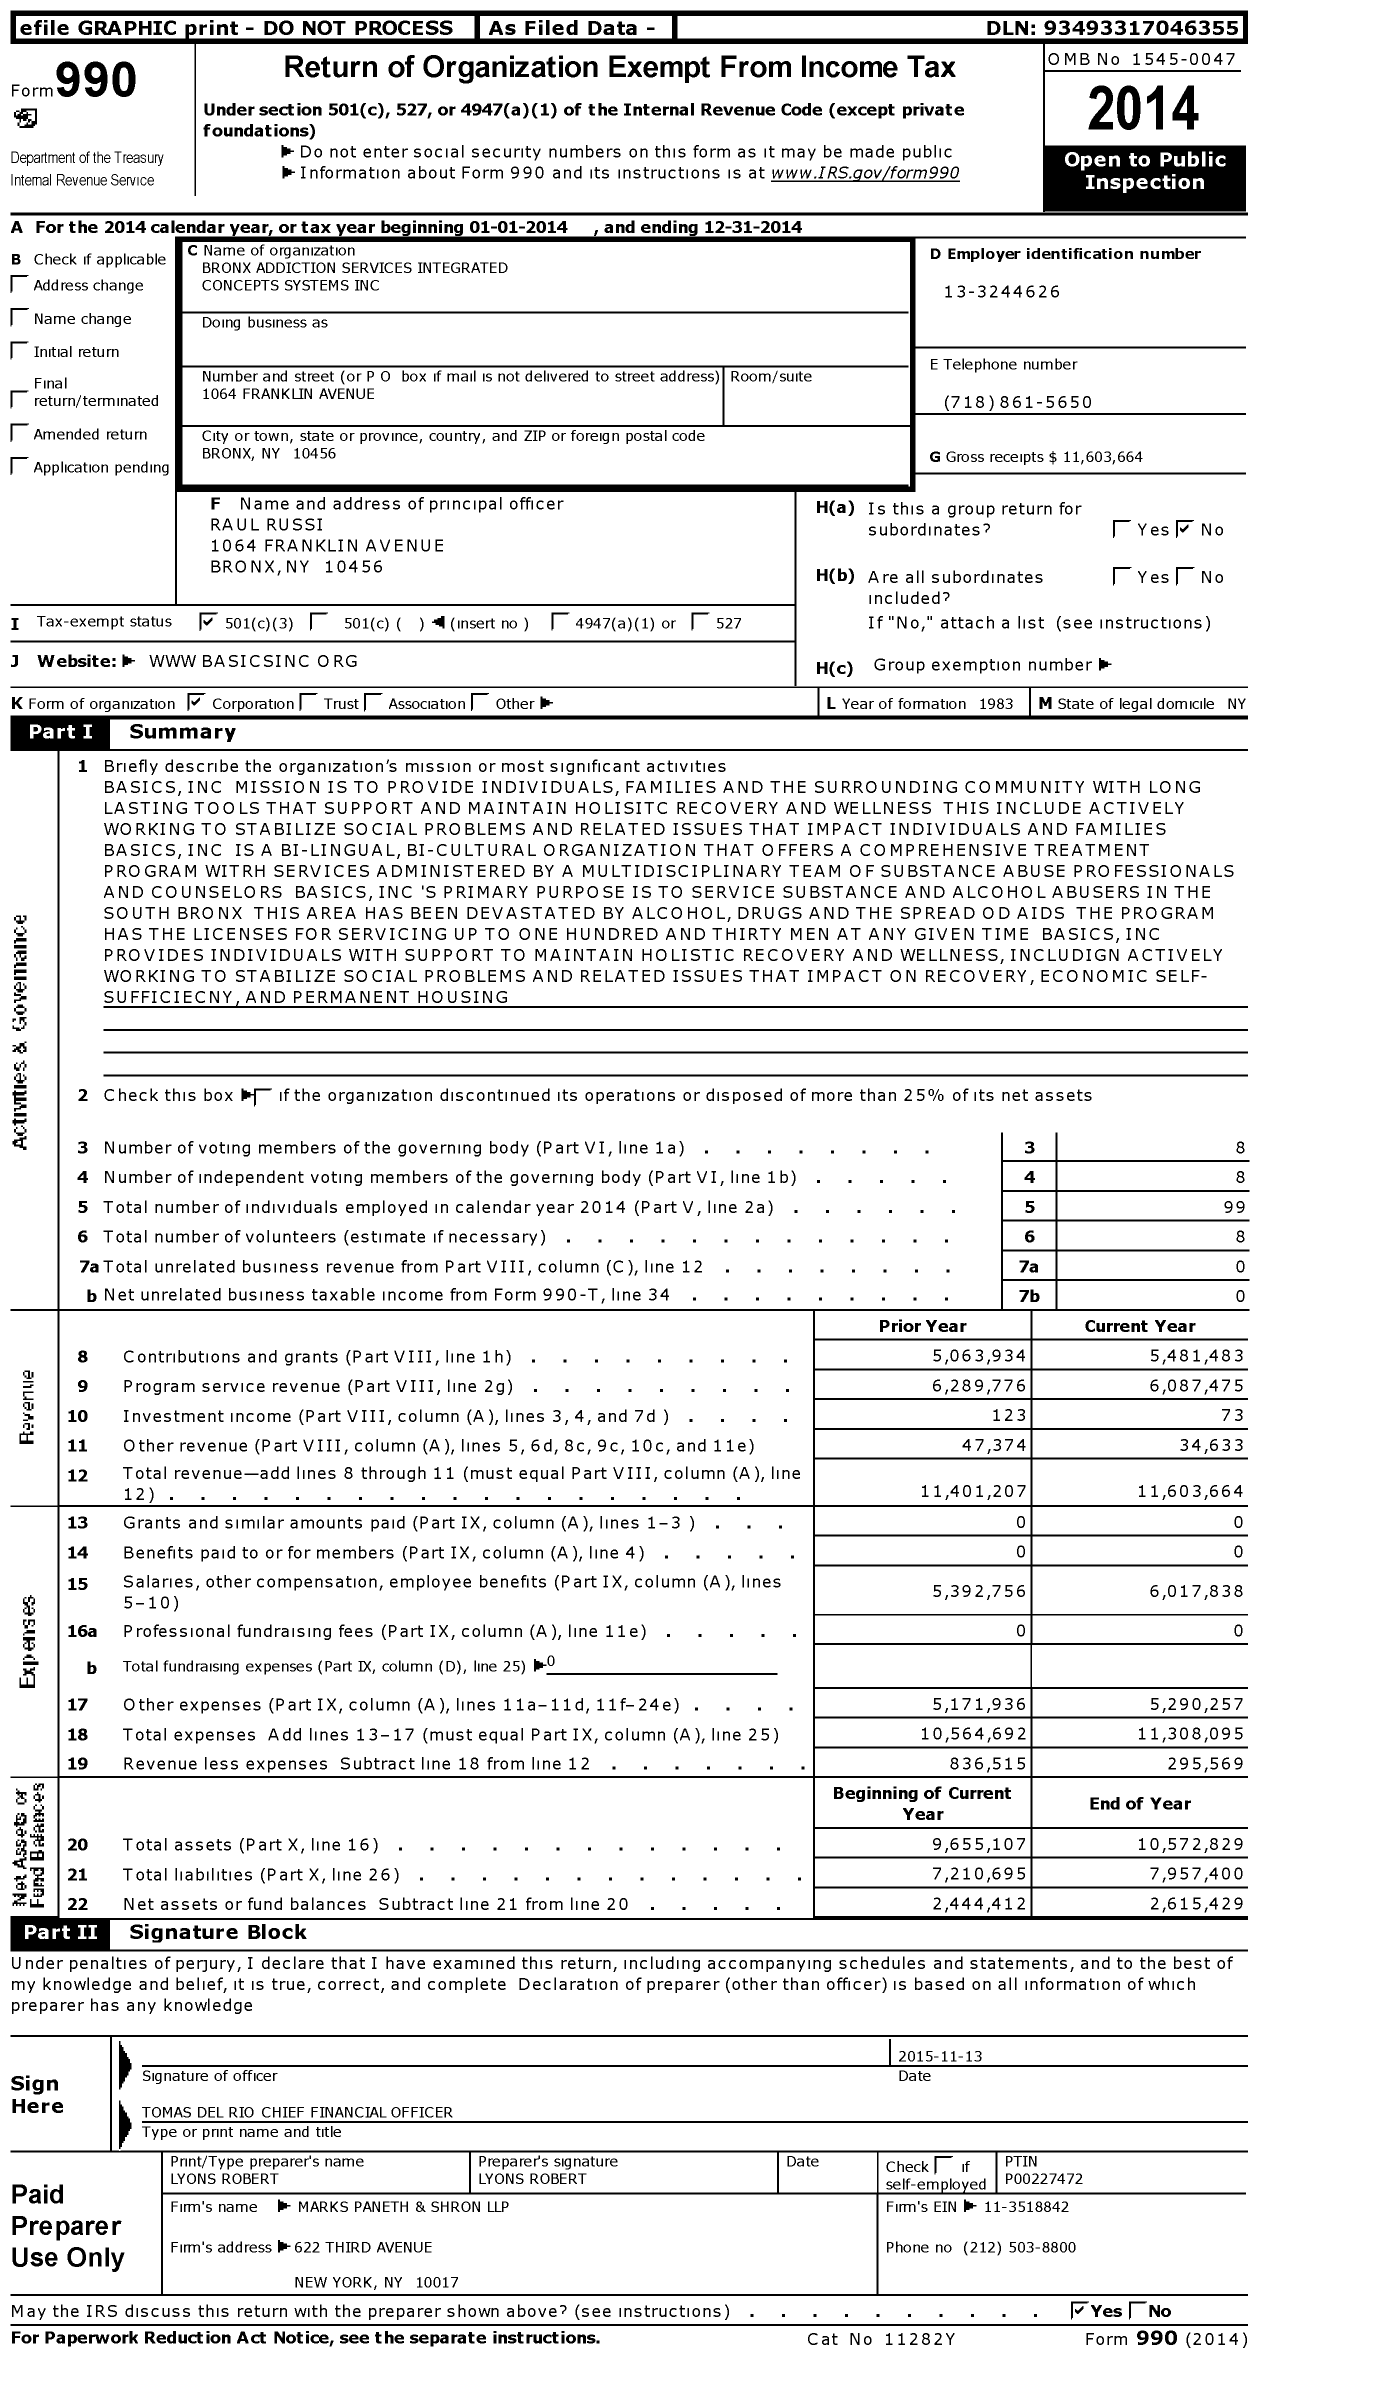 Image of first page of 2014 Form 990 for Bronx Addiction Services Integrated Concepts Systems (BASICS)